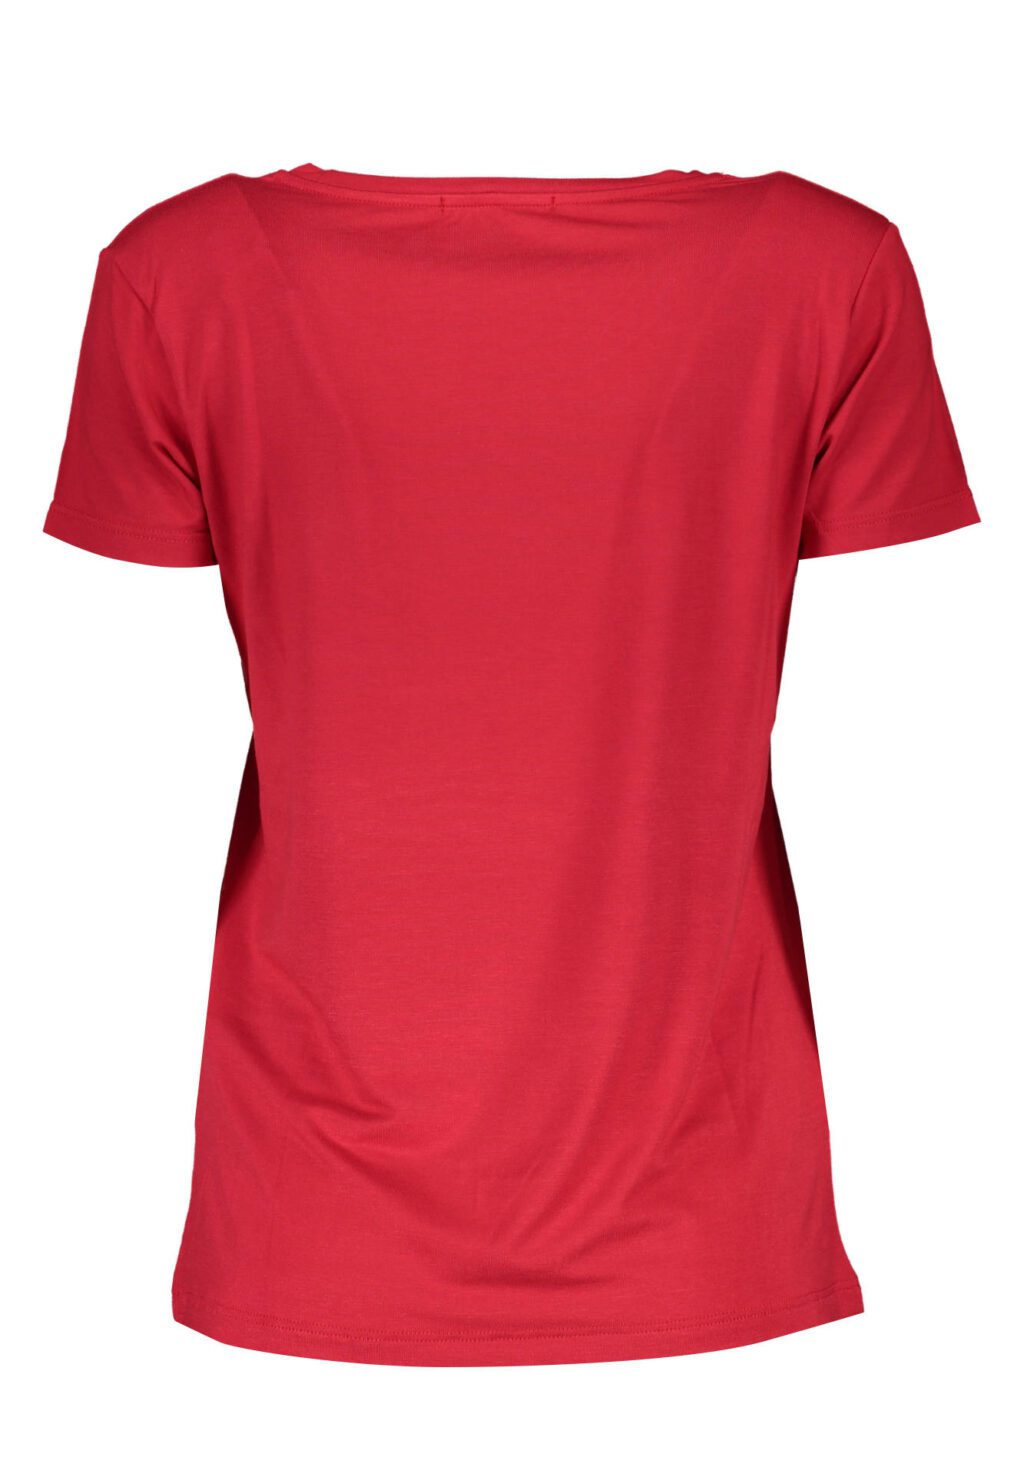 SCERVINO STREET WOMEN'S SHORT SLEEVE T-SHIRT RED D38TL0700-TDS001_ROSSO_SC007-CORALLO